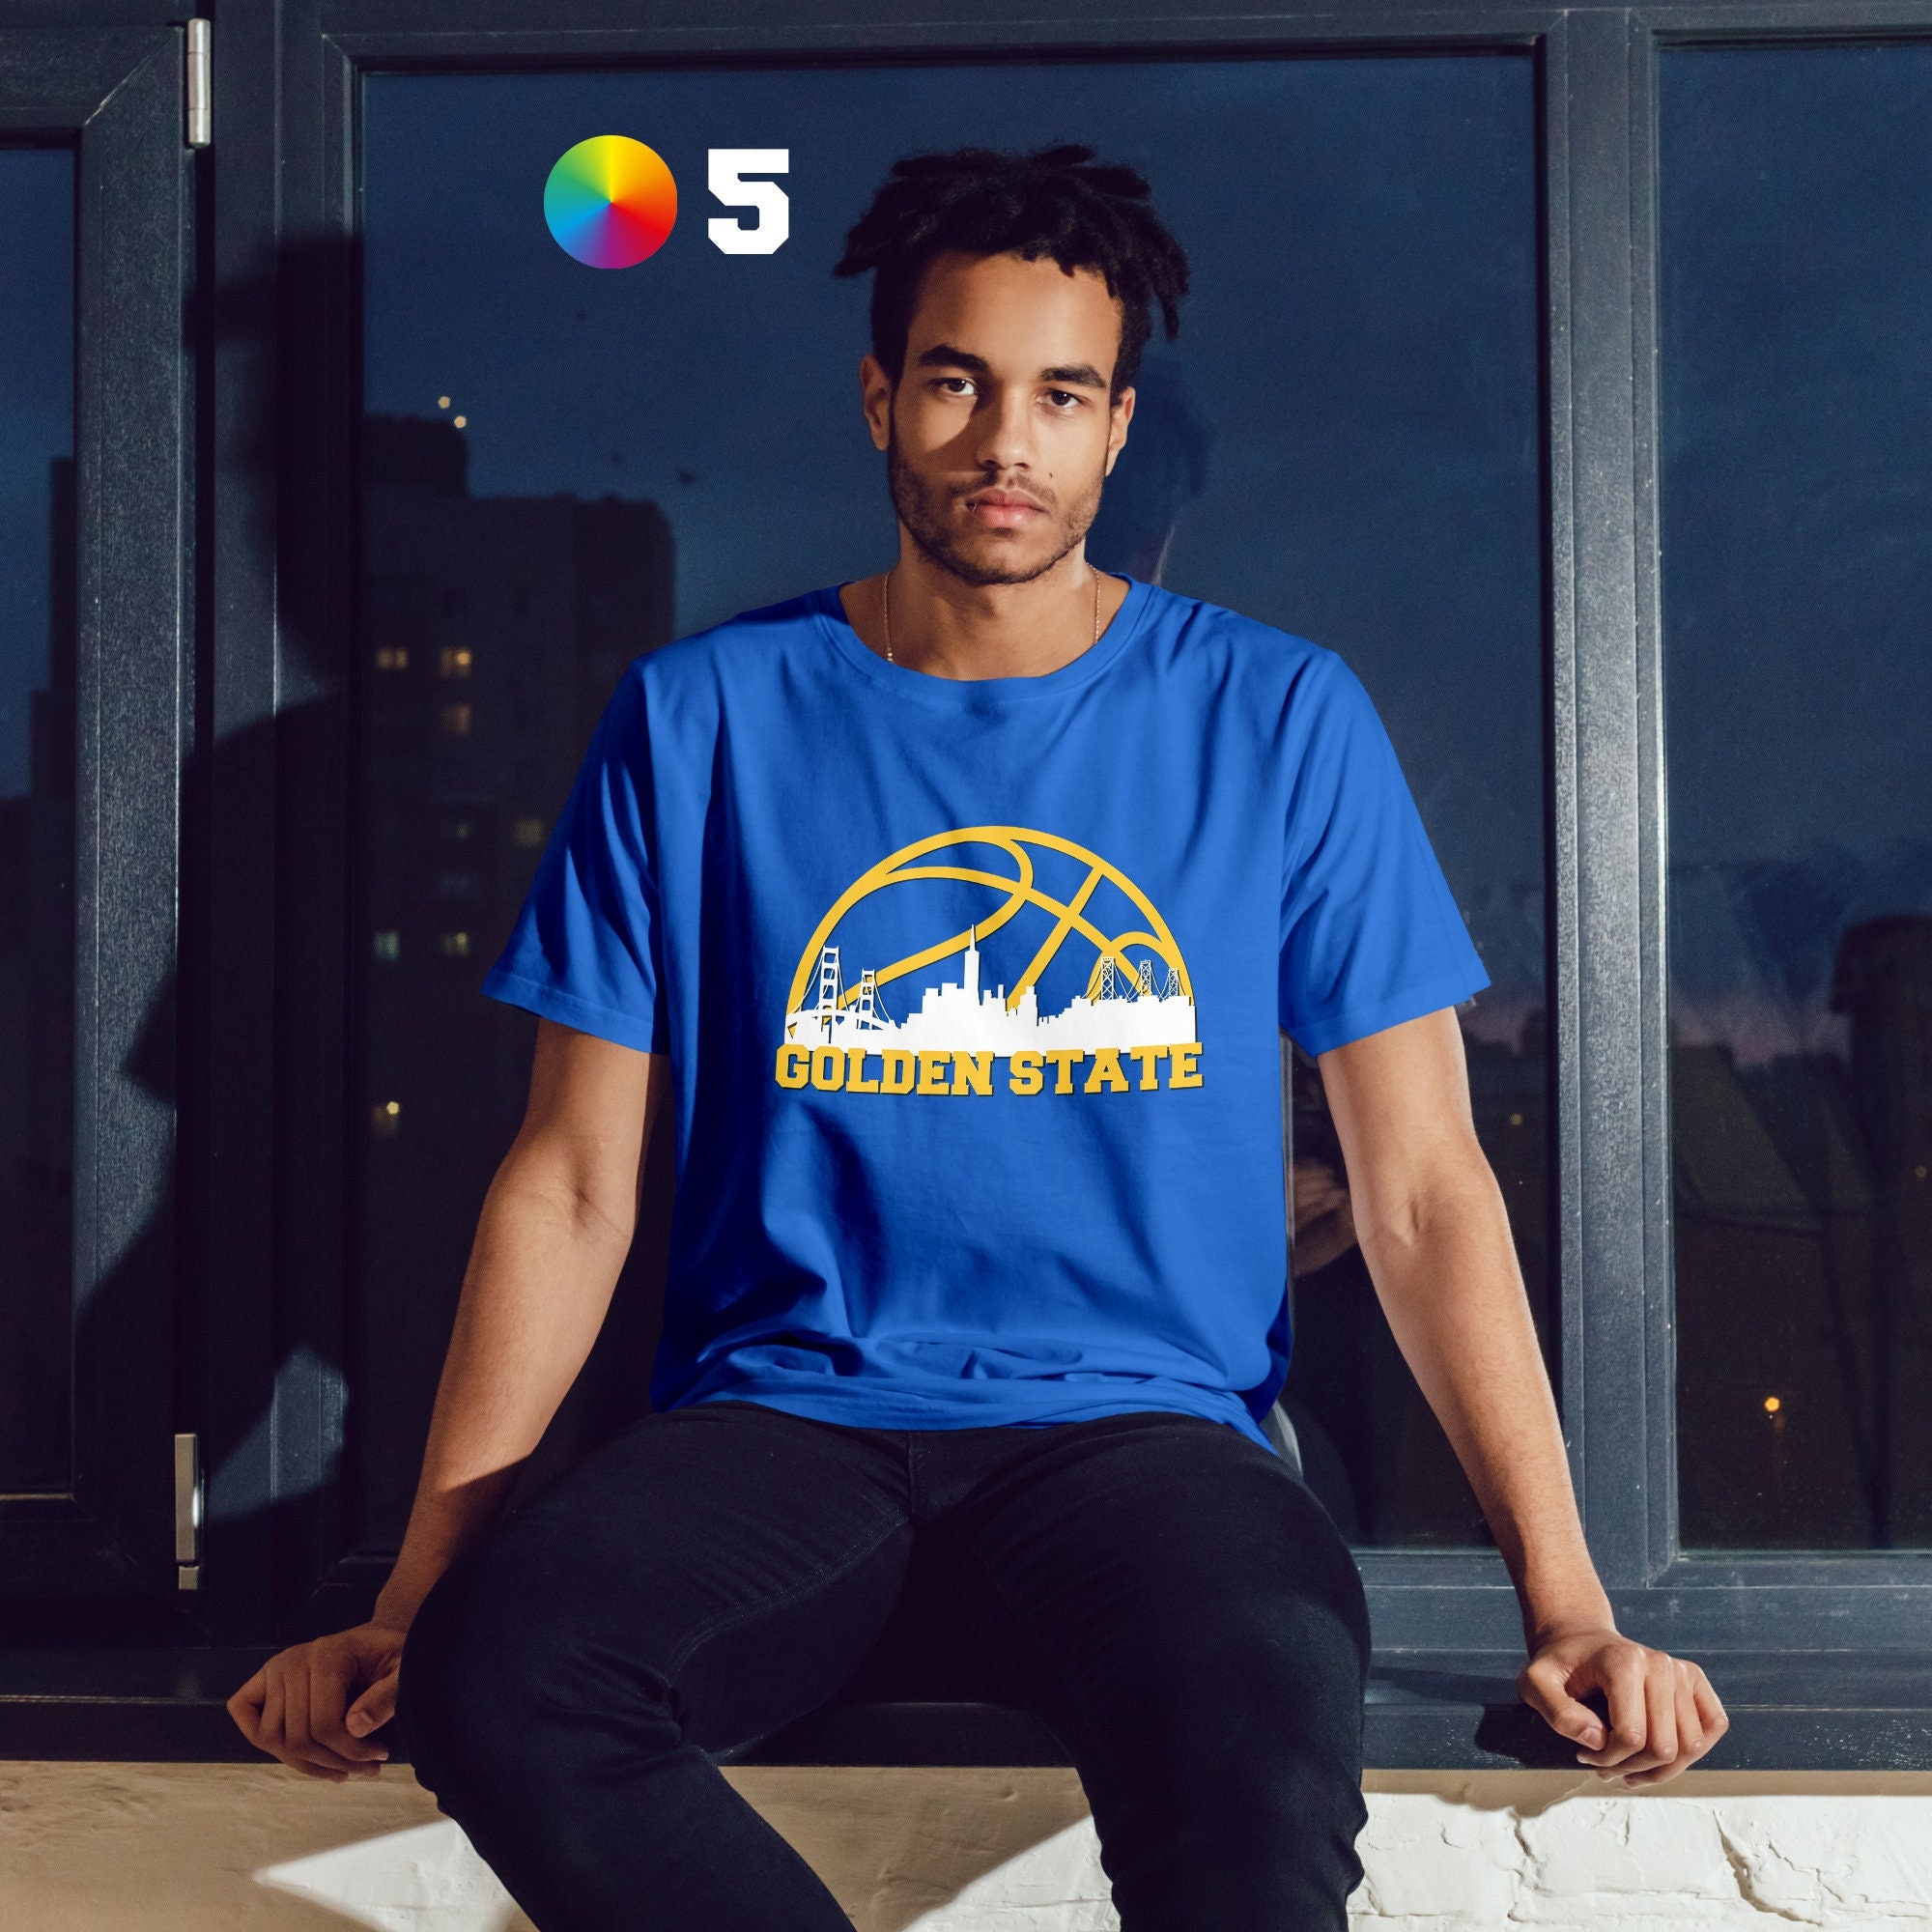 Mens Golden State Warriors 20/21 Gold Blooded Champion 2xl New Tee